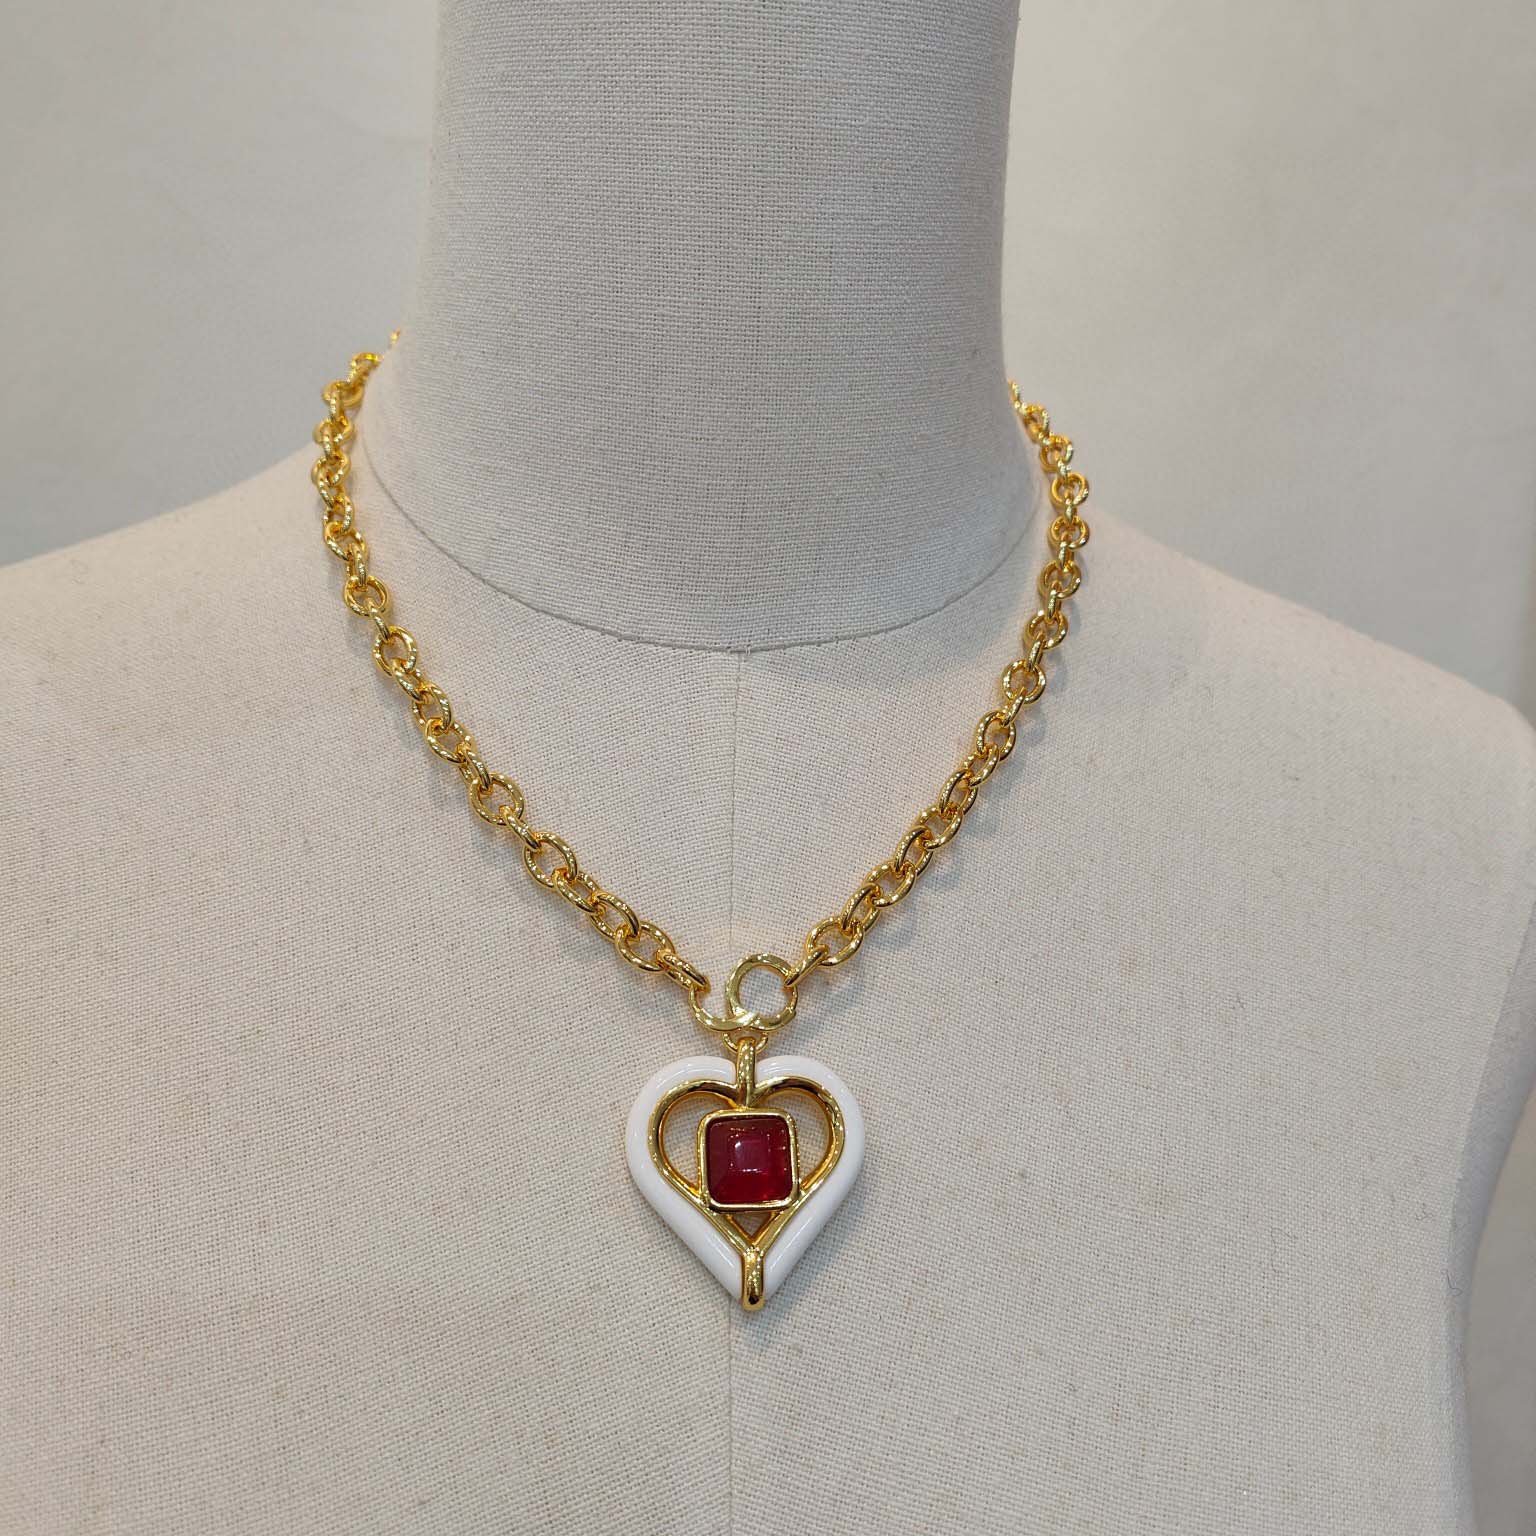 2023 Luxury Quality Charm Heart Shape Pendant Necklace With Red Diamond in 18K Gold Plated Have Stamp Box PS7520A298M